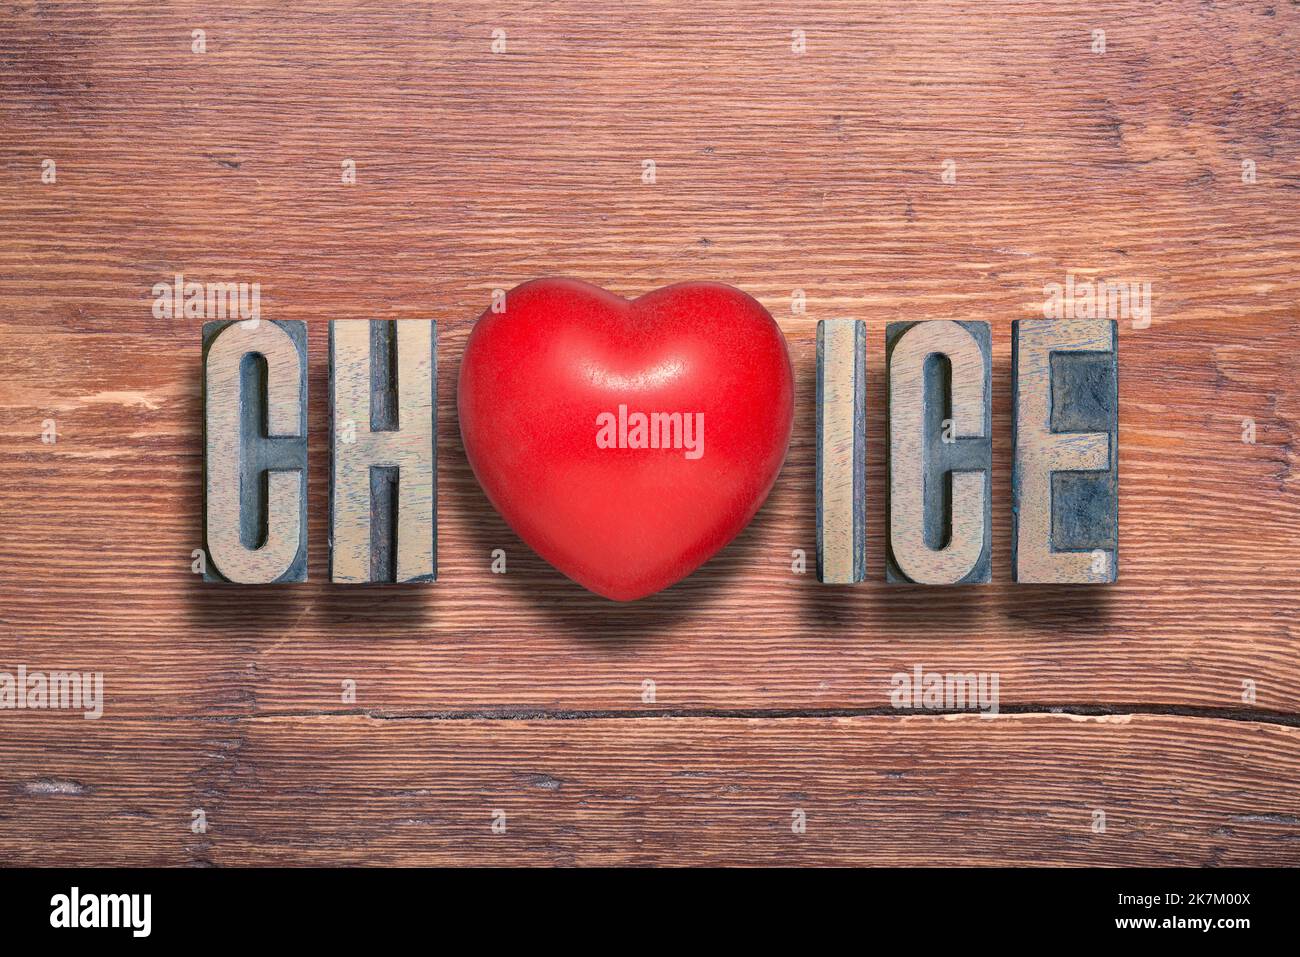 choice word combined on vintage varnished wooden surface with heart symbol inside Stock Photo